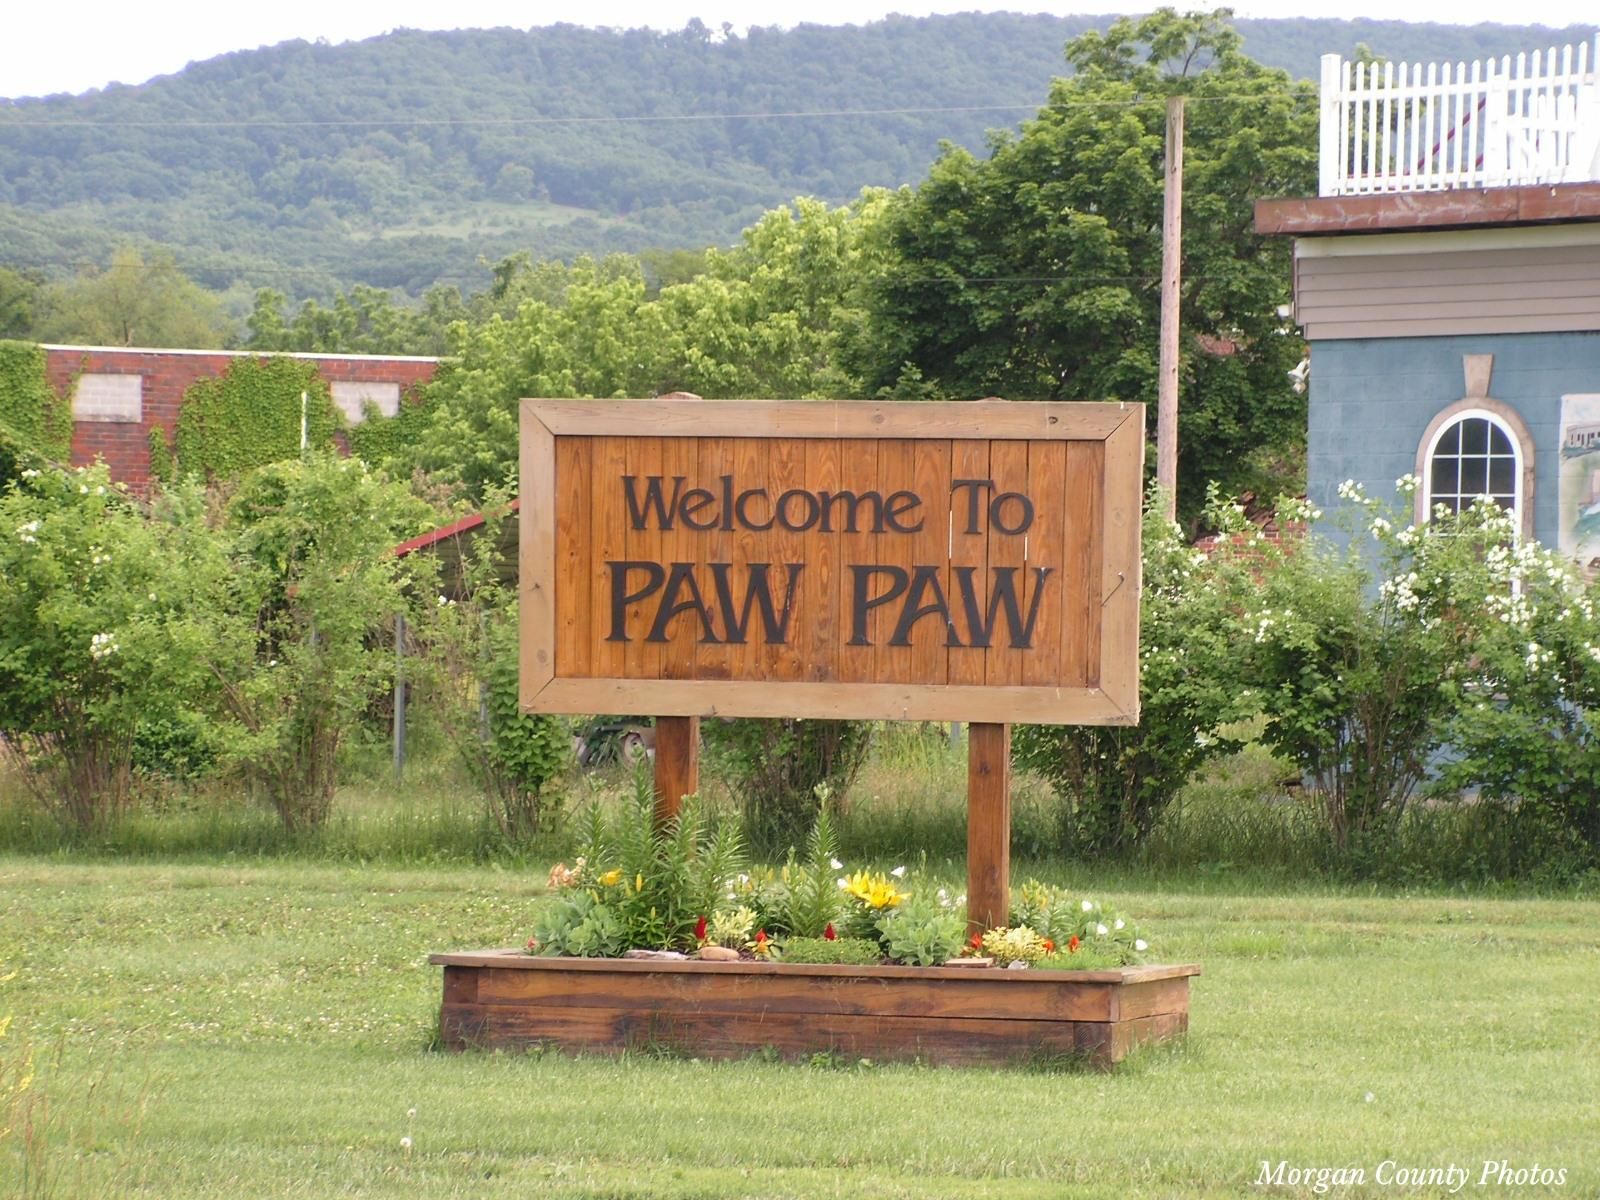 Paw West Virginia Wele Sign Morgan County